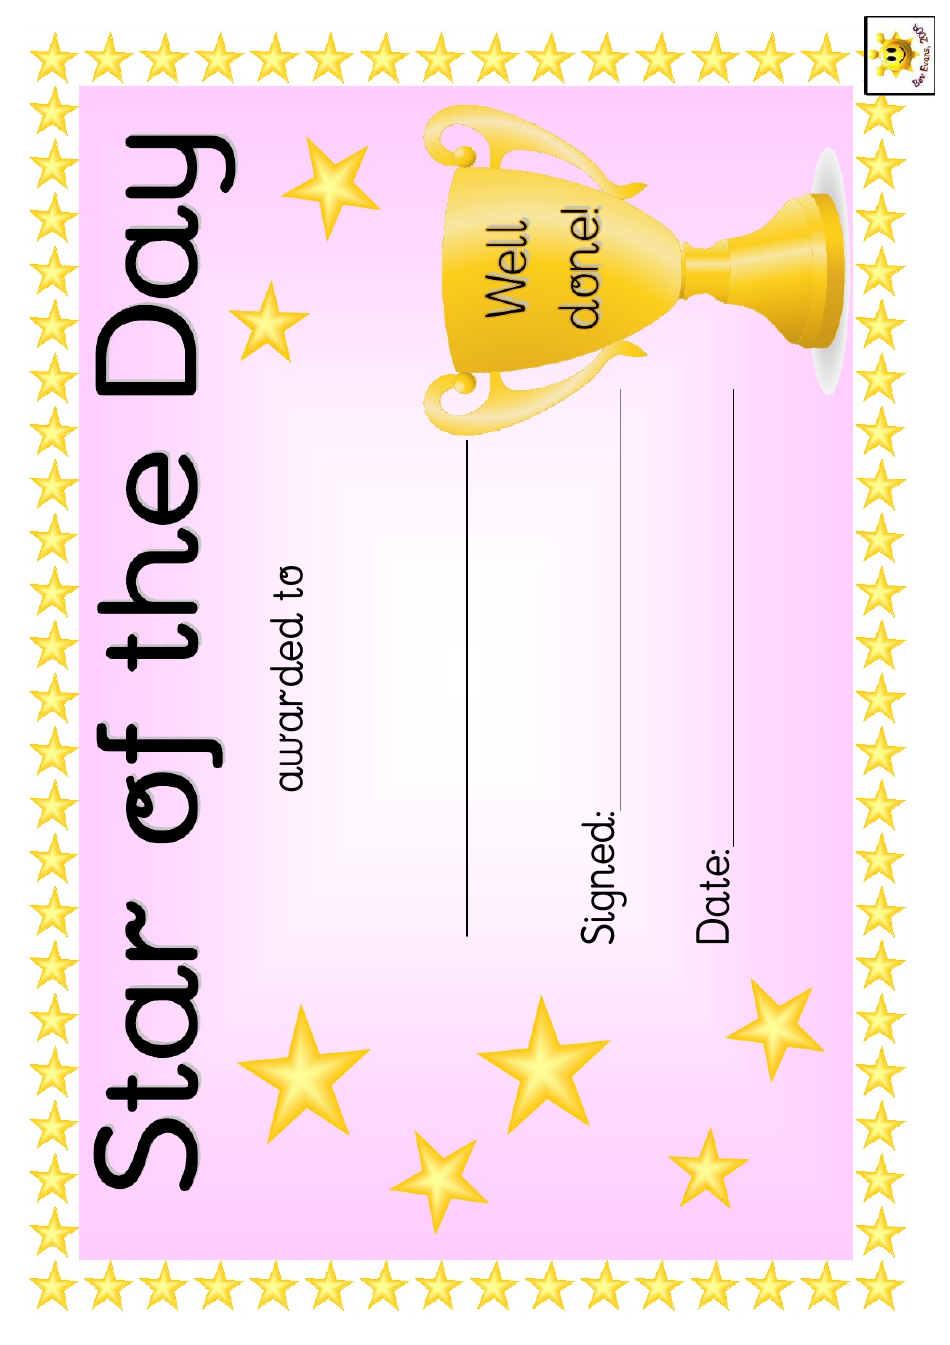 Star of the Day Award Certificate Template - Pink preview image